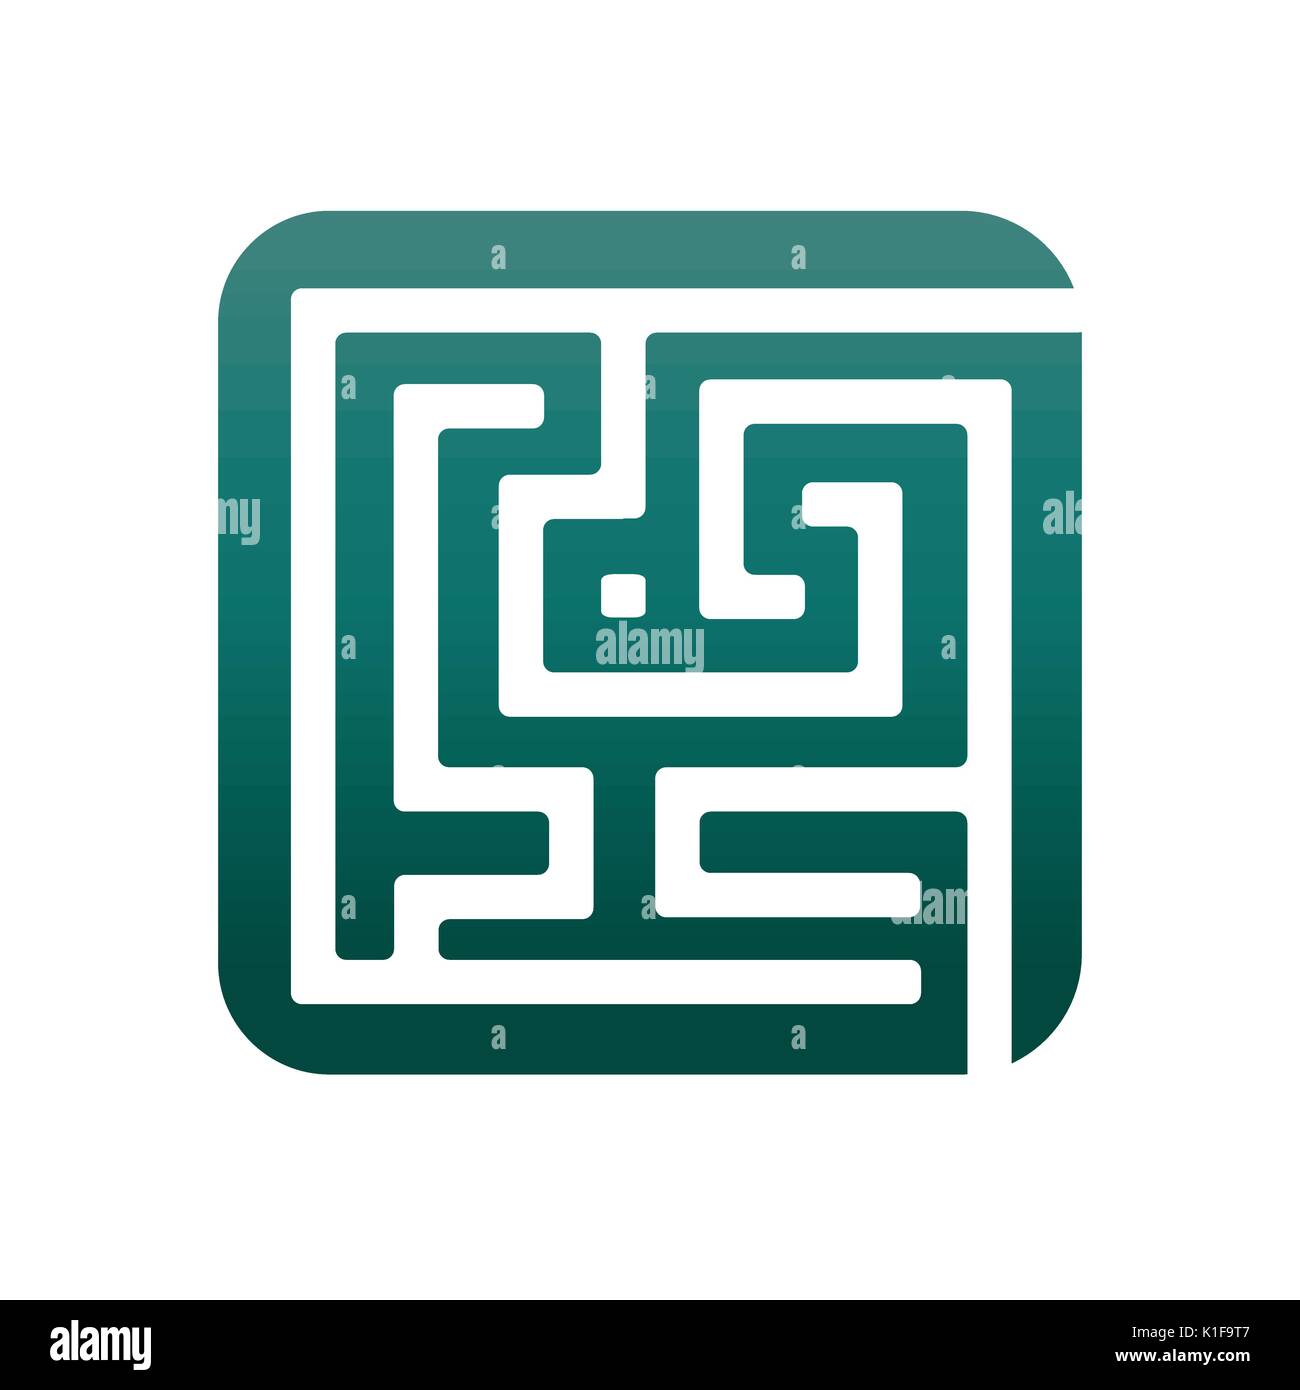 maze lines within a square, icon design, isolated on white background. Stock Vector